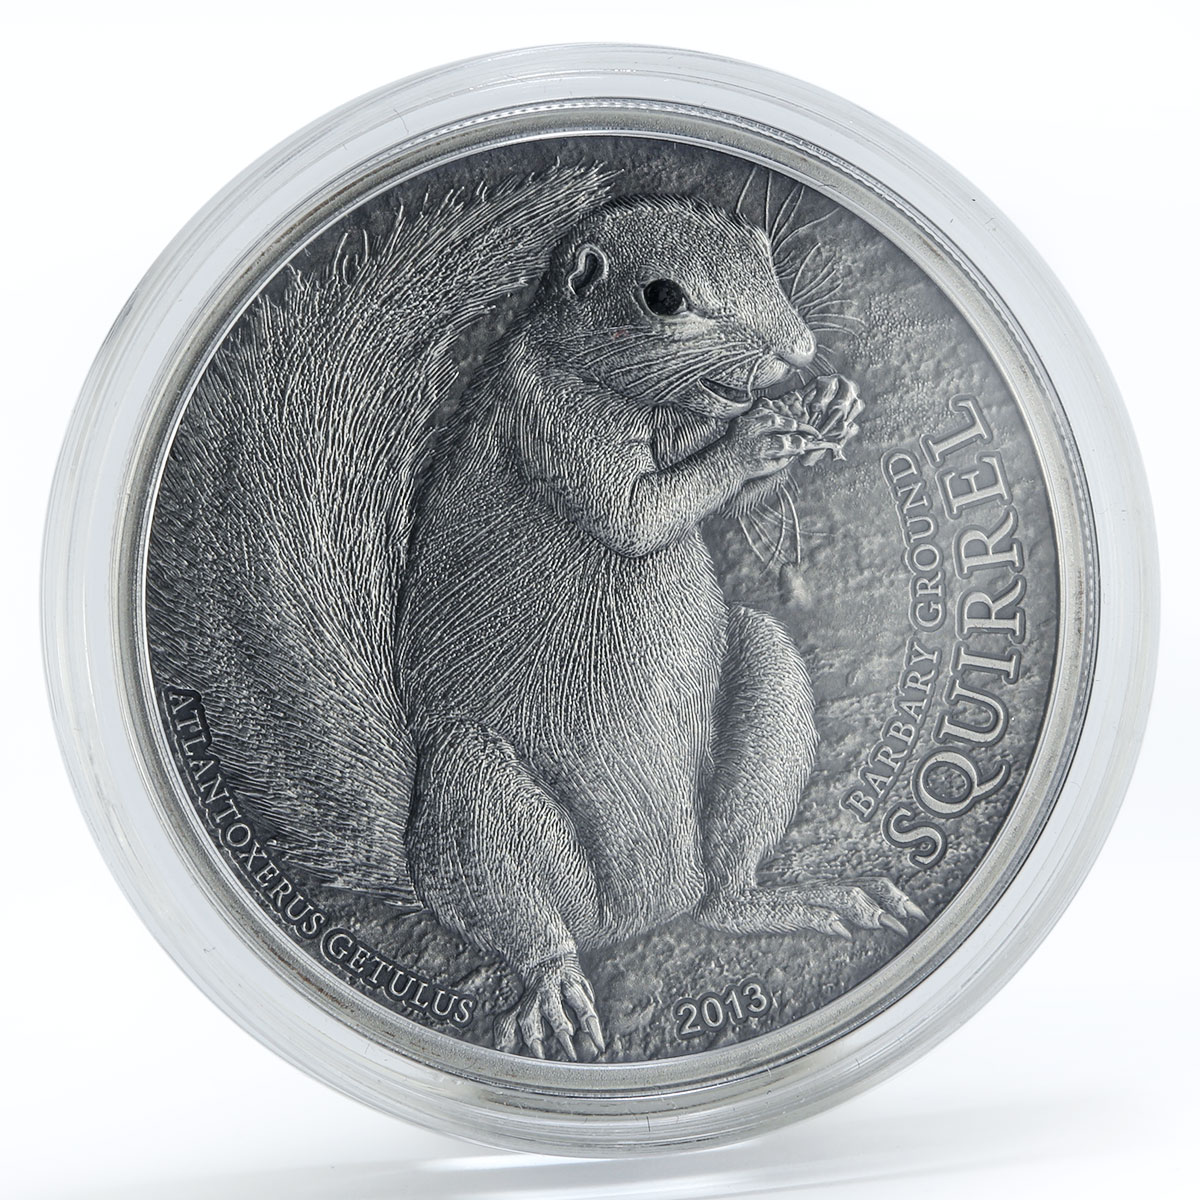 Palau 5 dollar The Barbary Ground Squirrel silver coin 2013